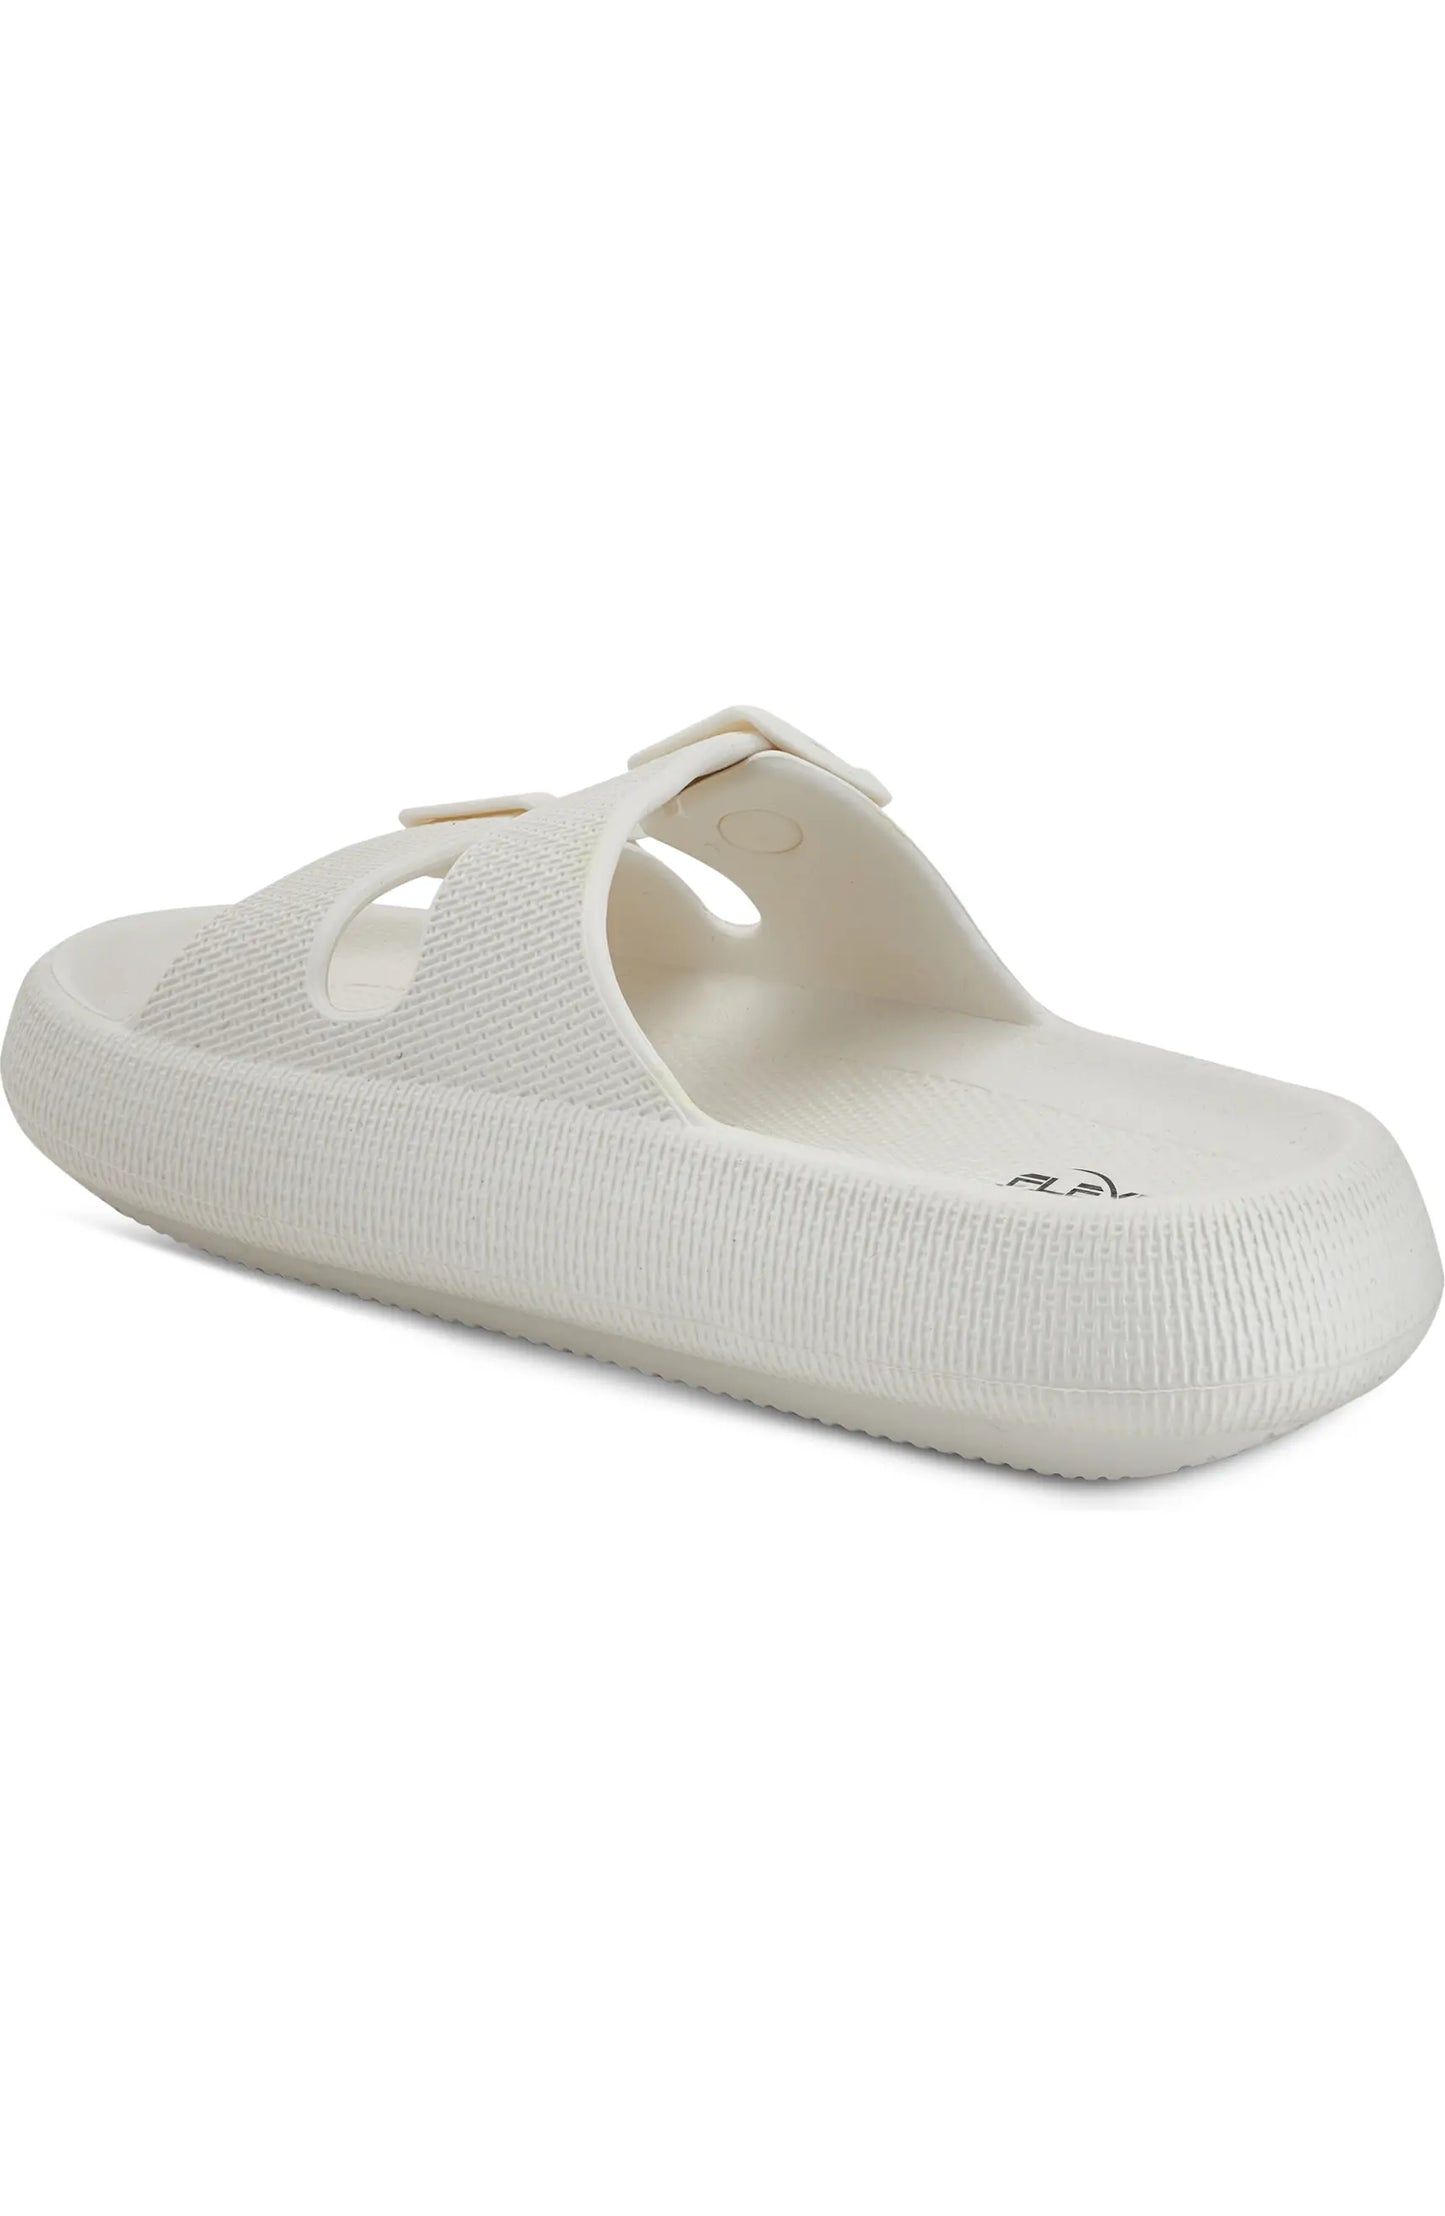 SpringStep Bubbles Waterproof Slide Sandal (Women) White - All Mixed Up 